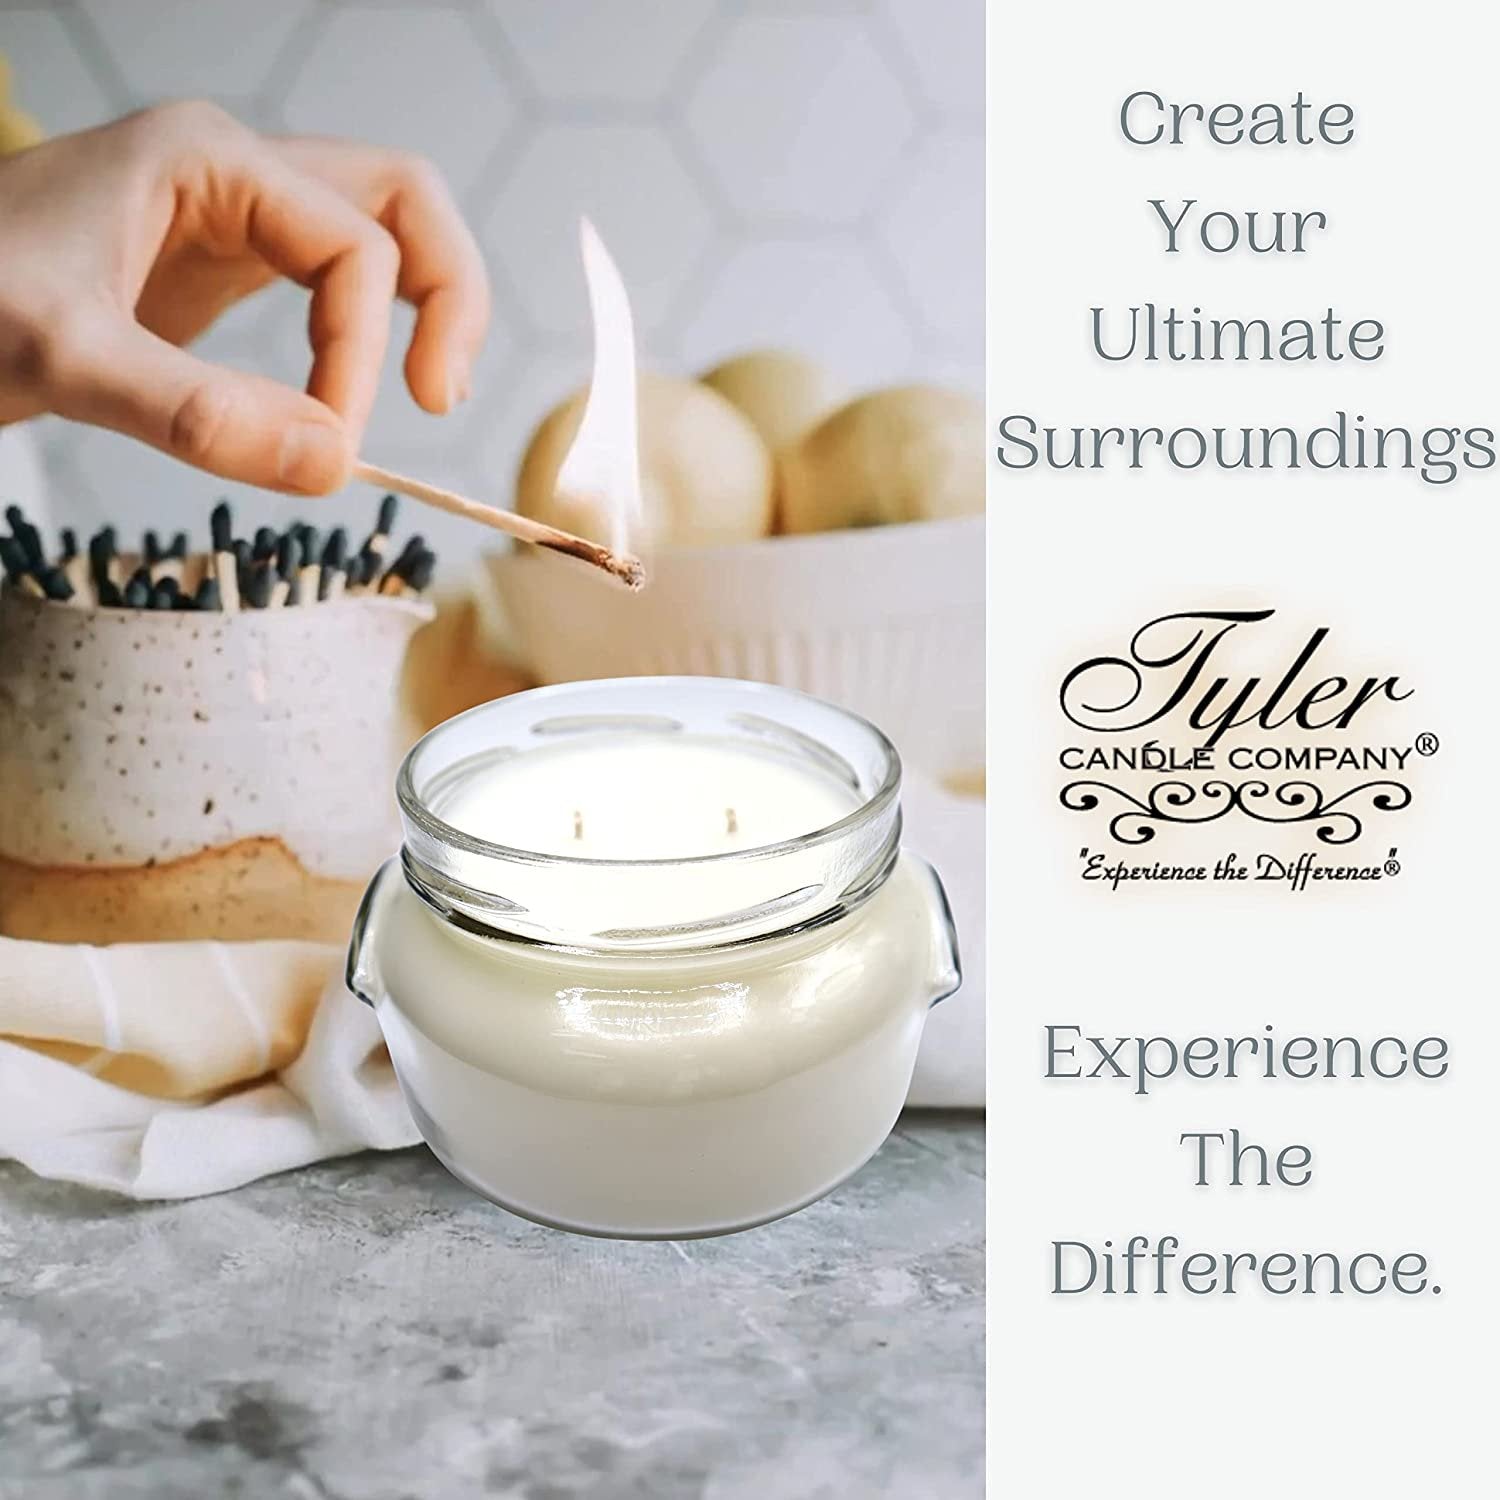 Tyler Candle Company, Diva Jar Candle, Scented Candles Gifts for Women, Ultimate Aromatherapy Experience, Luxurious Candles with Essential Oils, Long-Lasting Burn, Large Candle 22oz